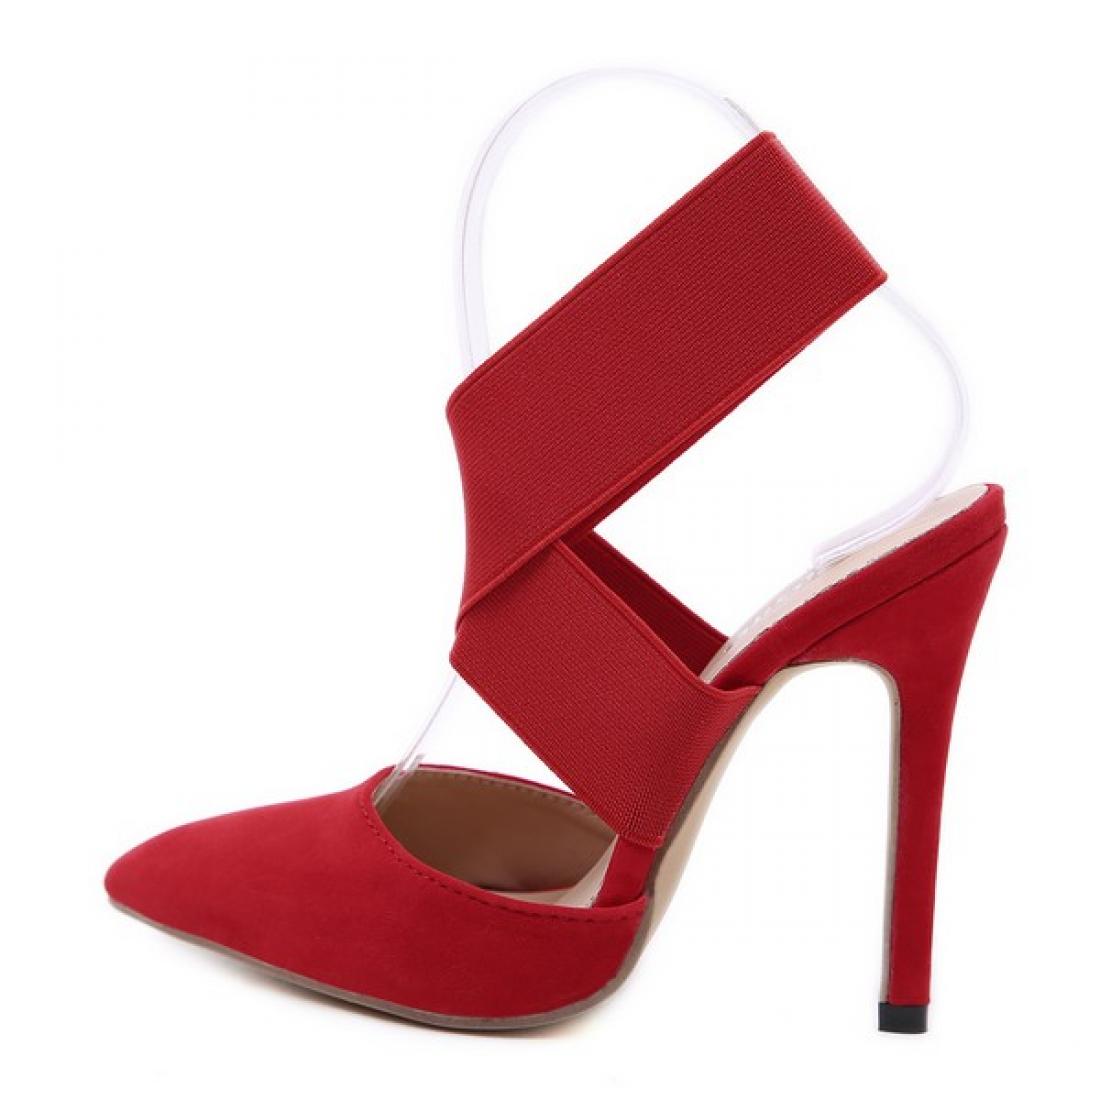 Red Suede Ankle Cross Stiletto High Heels Sandals Shoes High ...